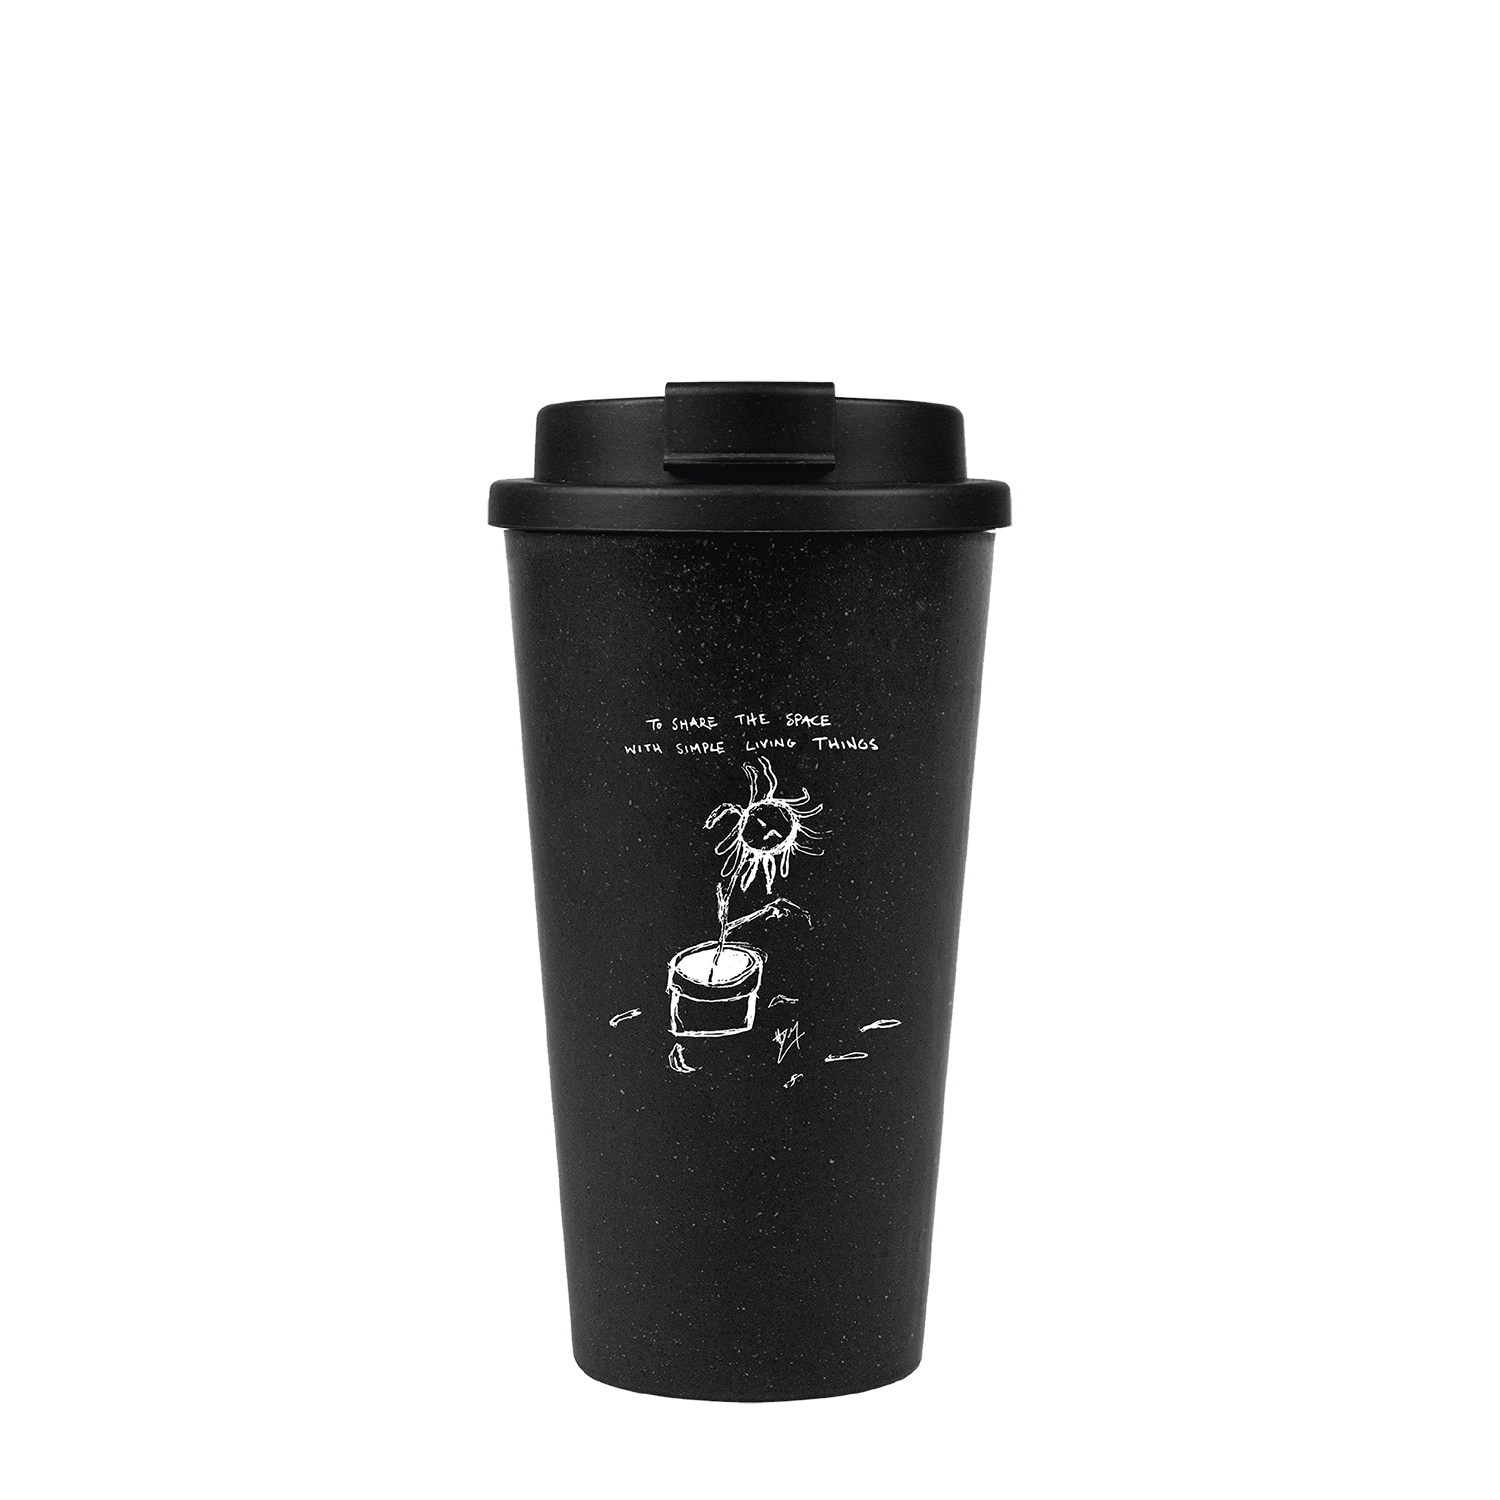 Simple Living Things Reusable Cup